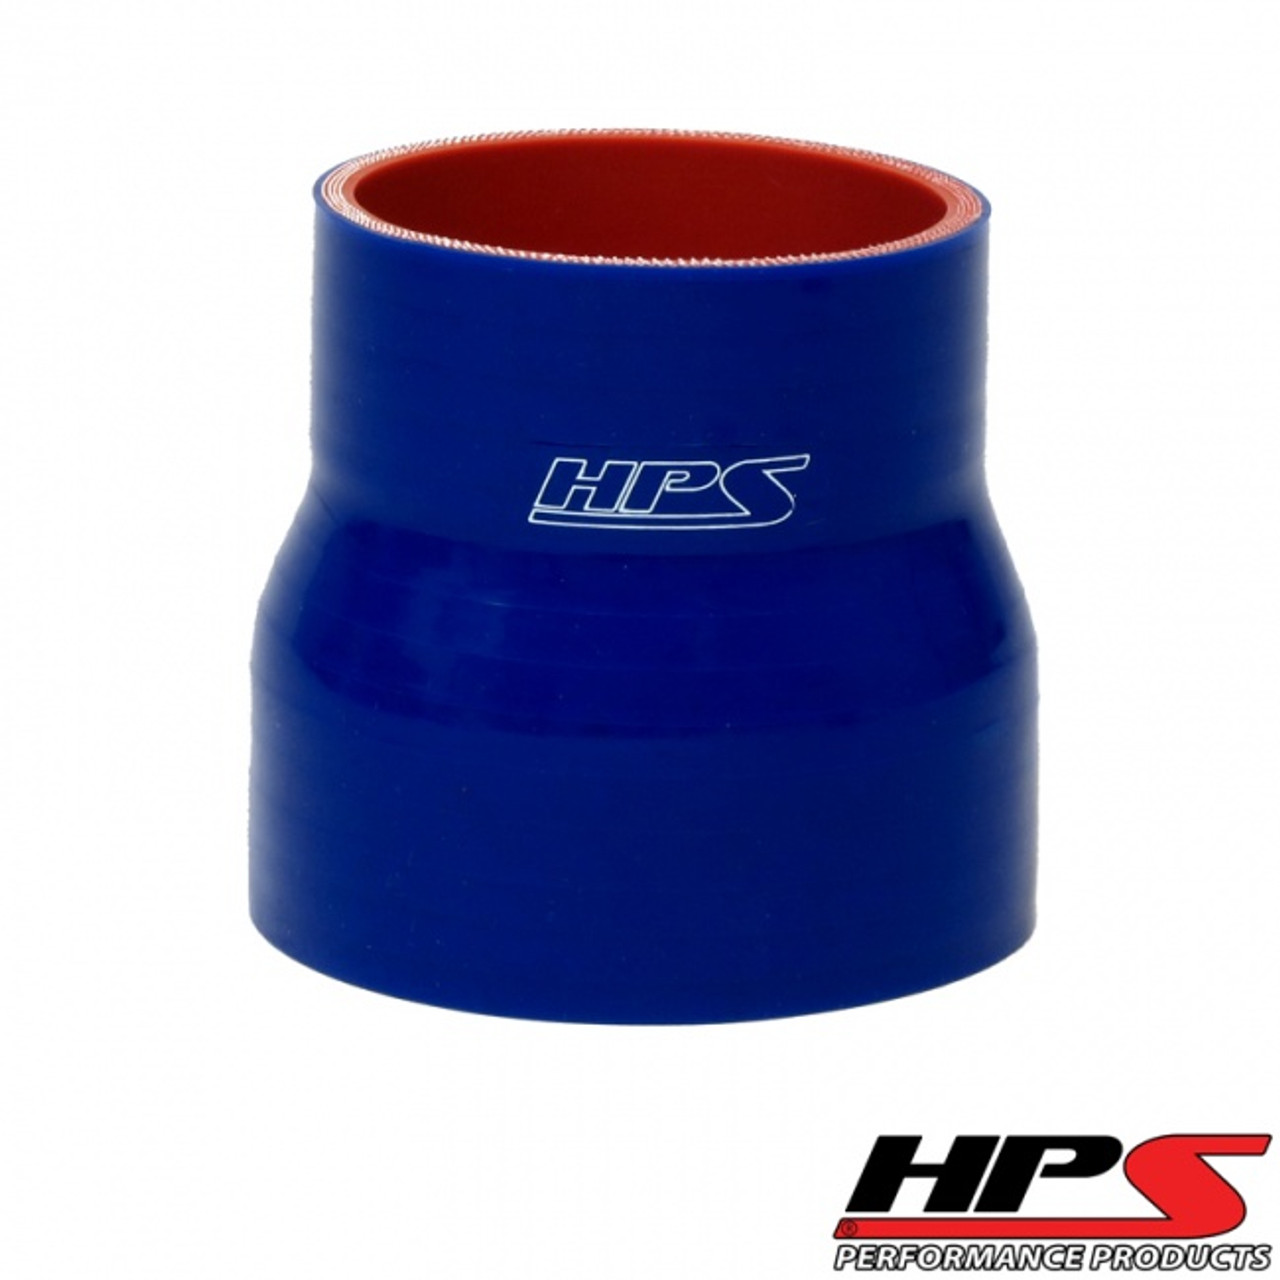 HPS 4 Ply Reinforced Straight Silicone Hose Reducer/Adapter 2.5" x 3.50" - Blue